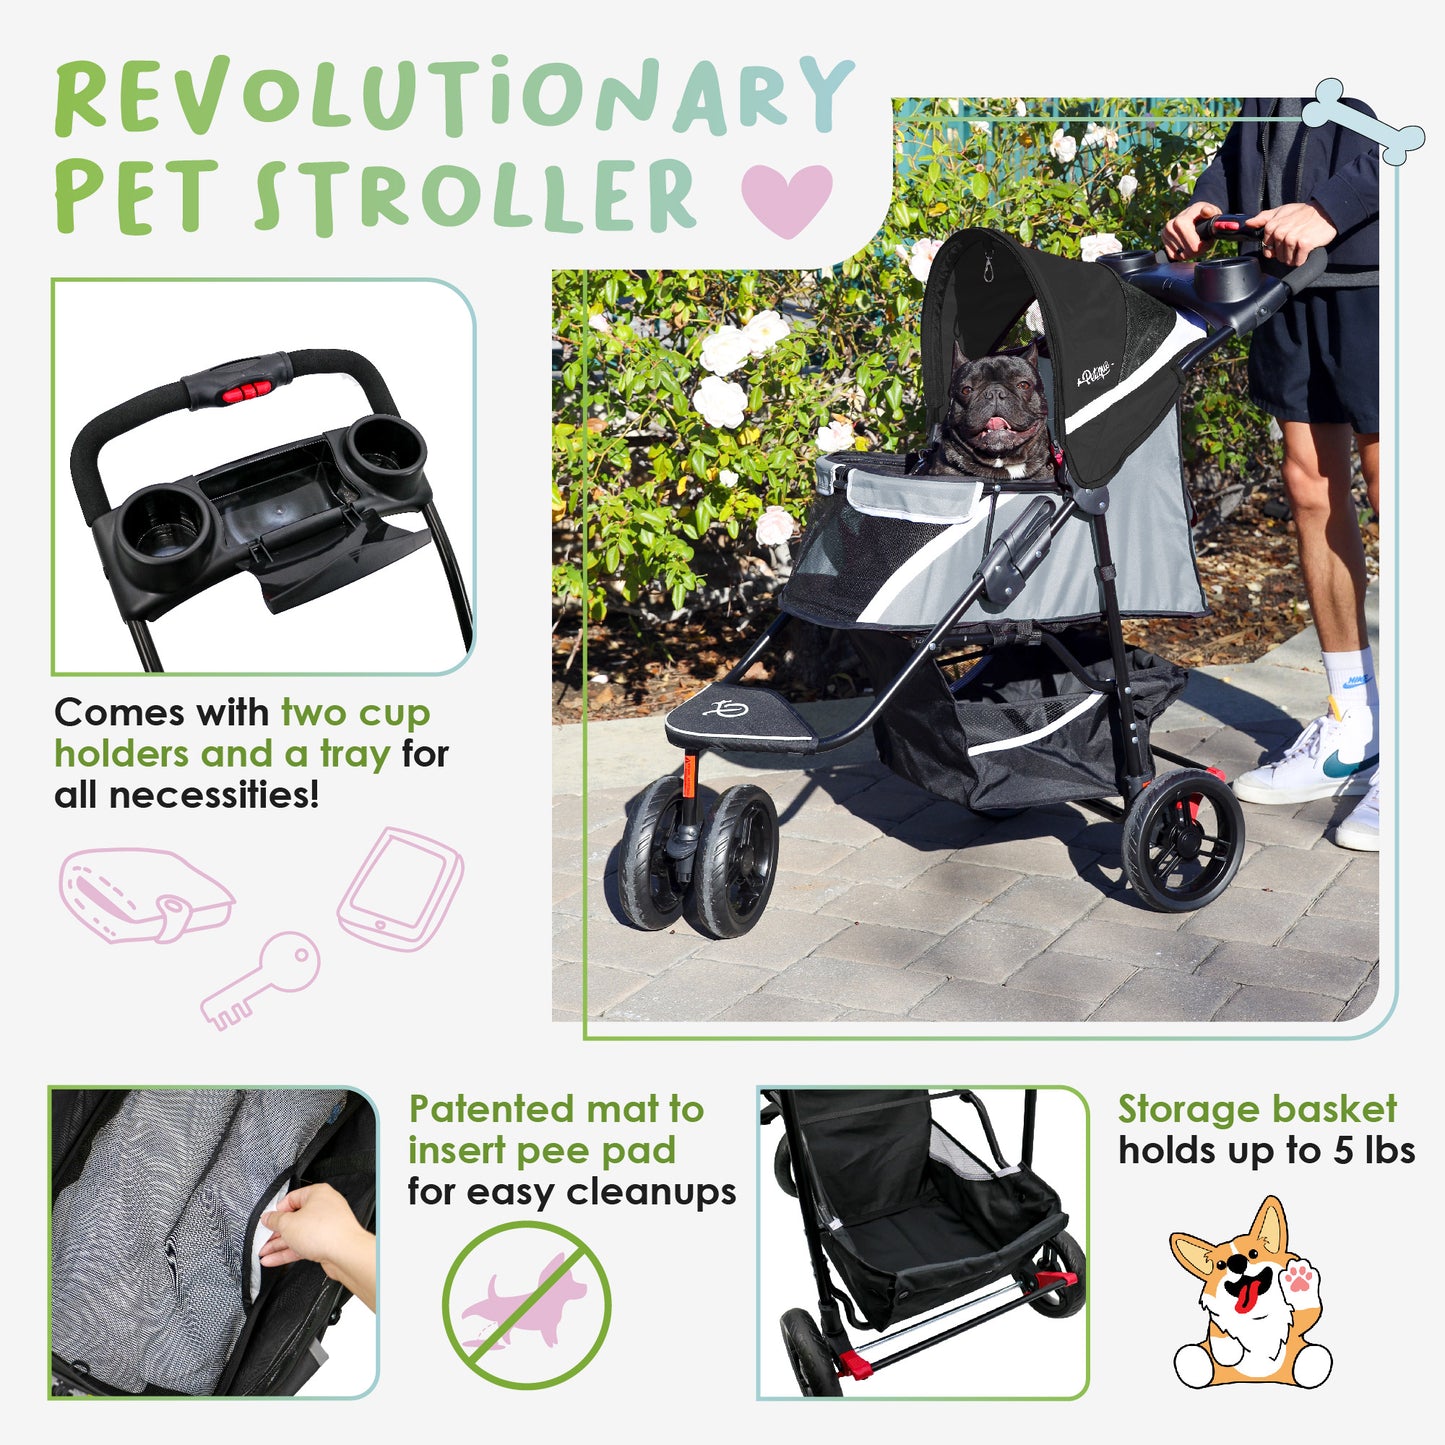 revolutionary pet stroller with cup holder tray and pee pad insert